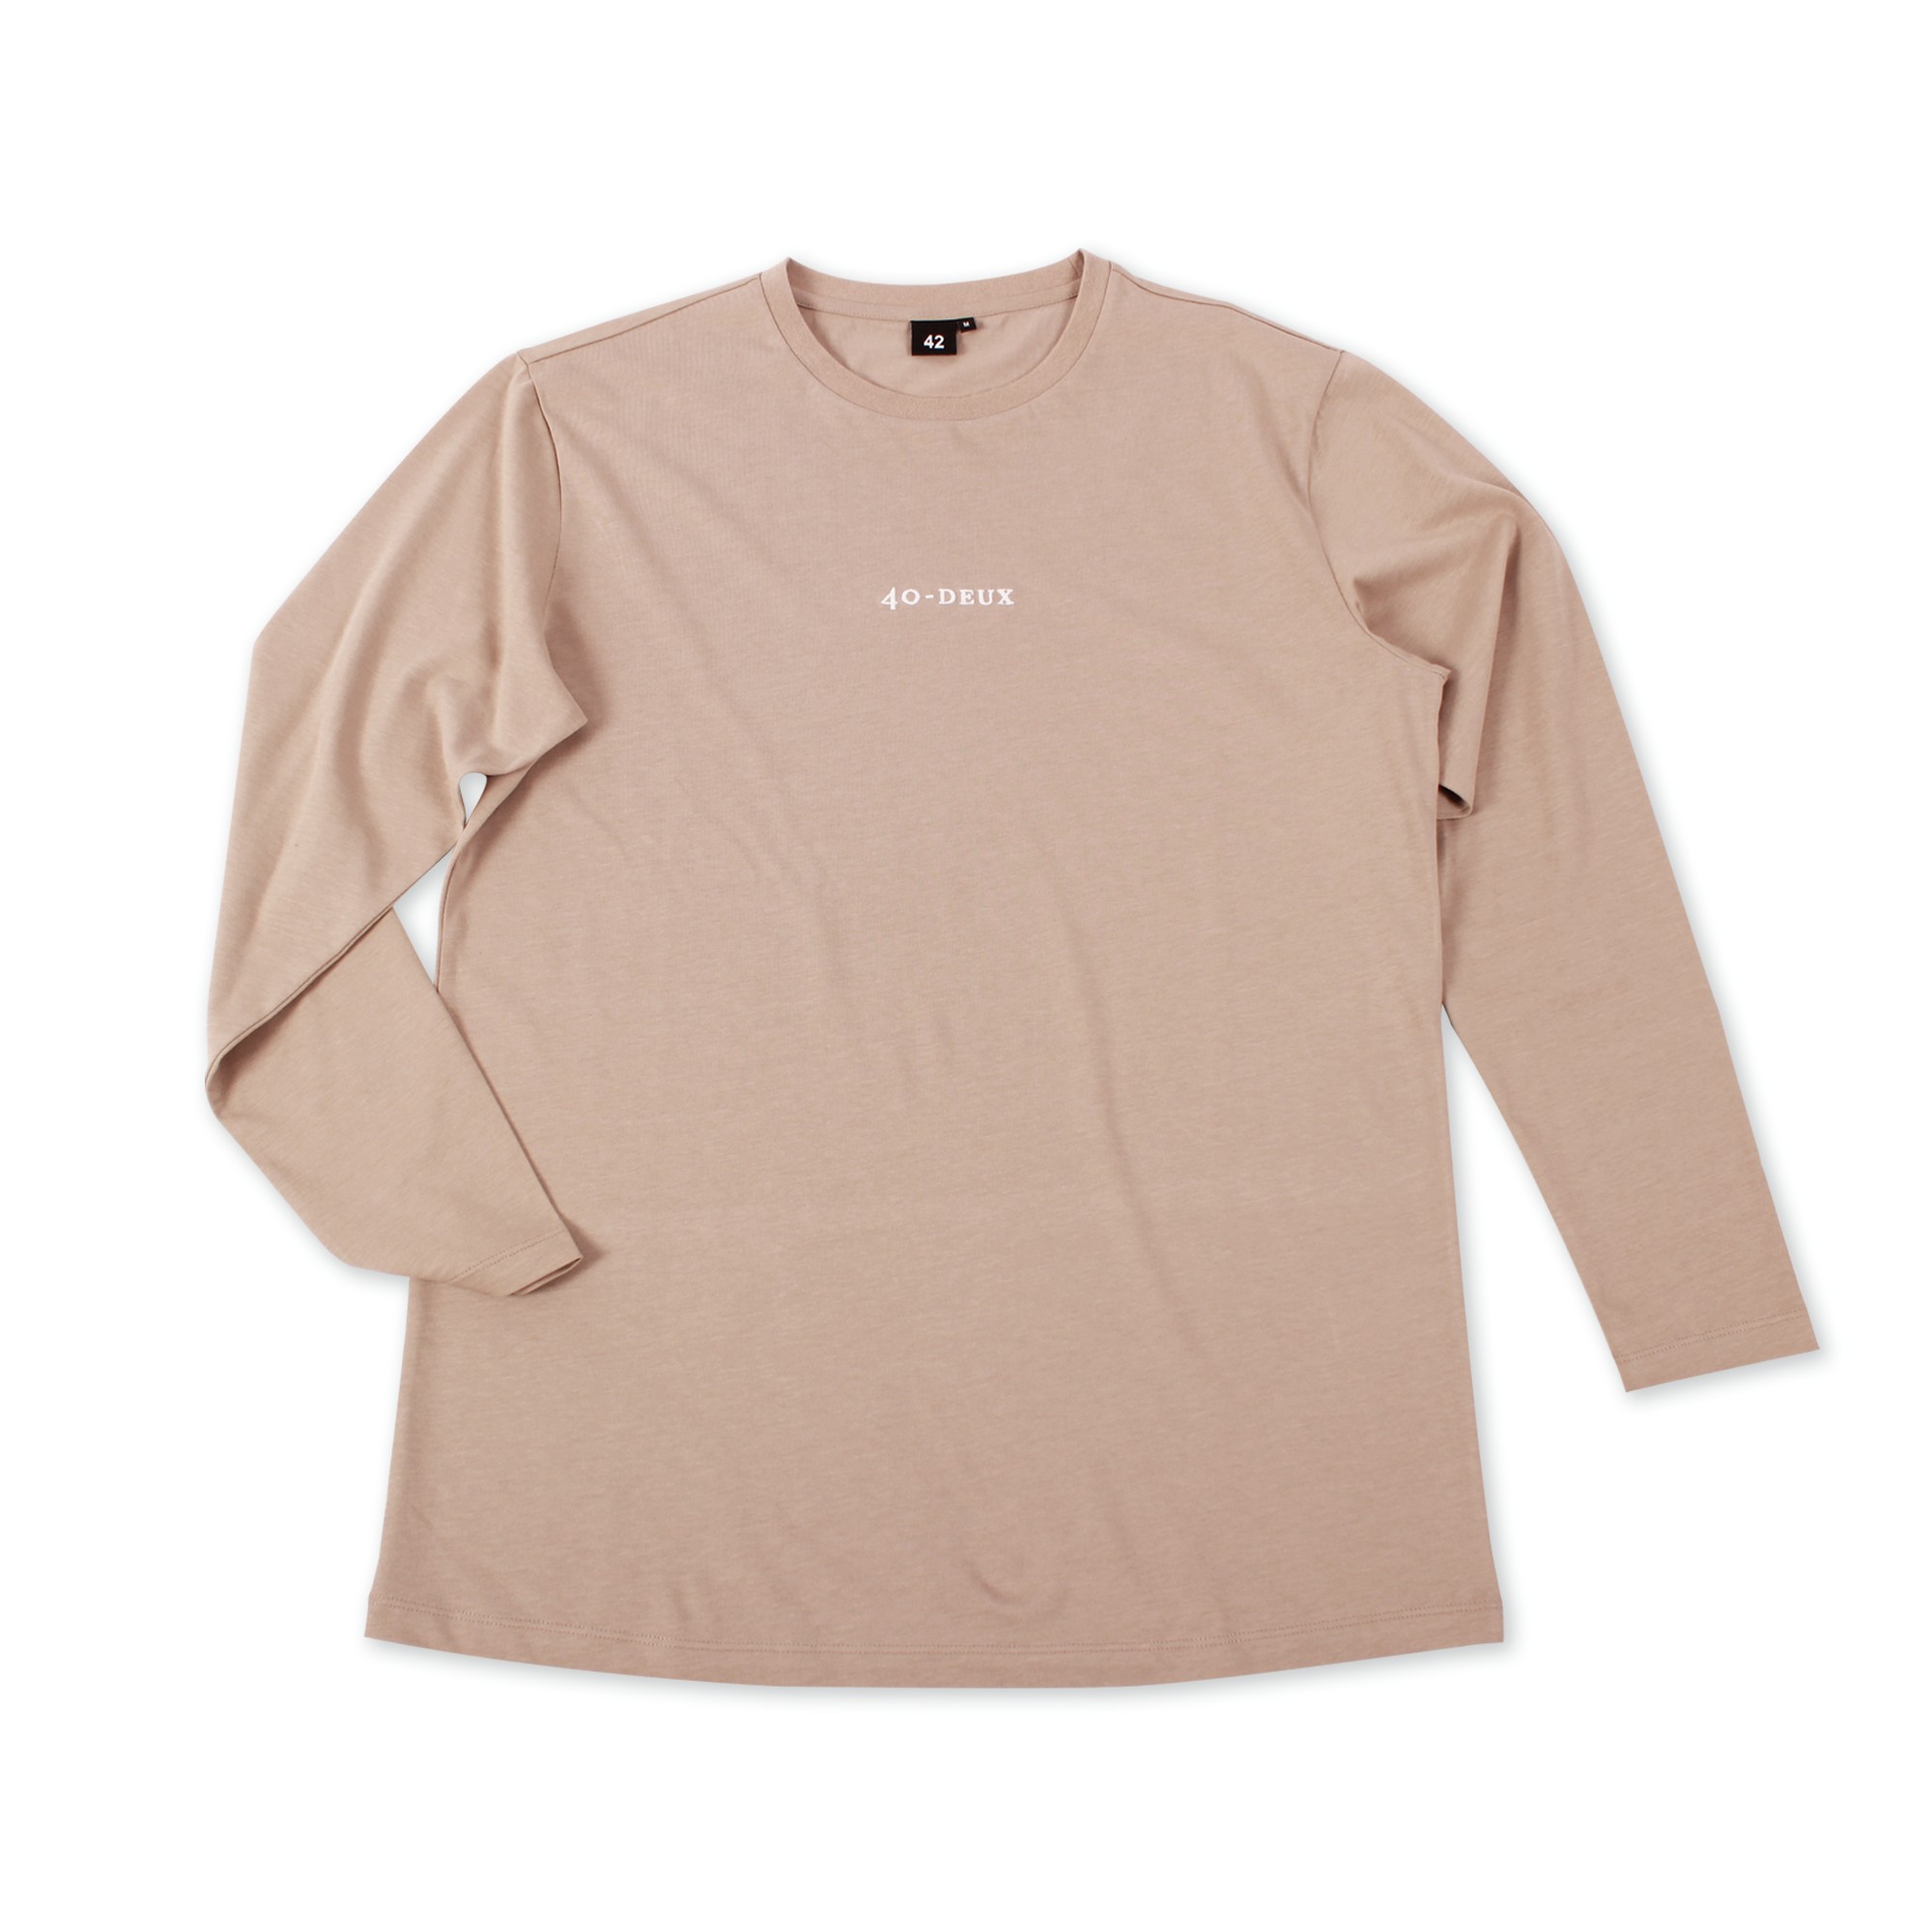 40-DEUX Embroidery T-Shirt